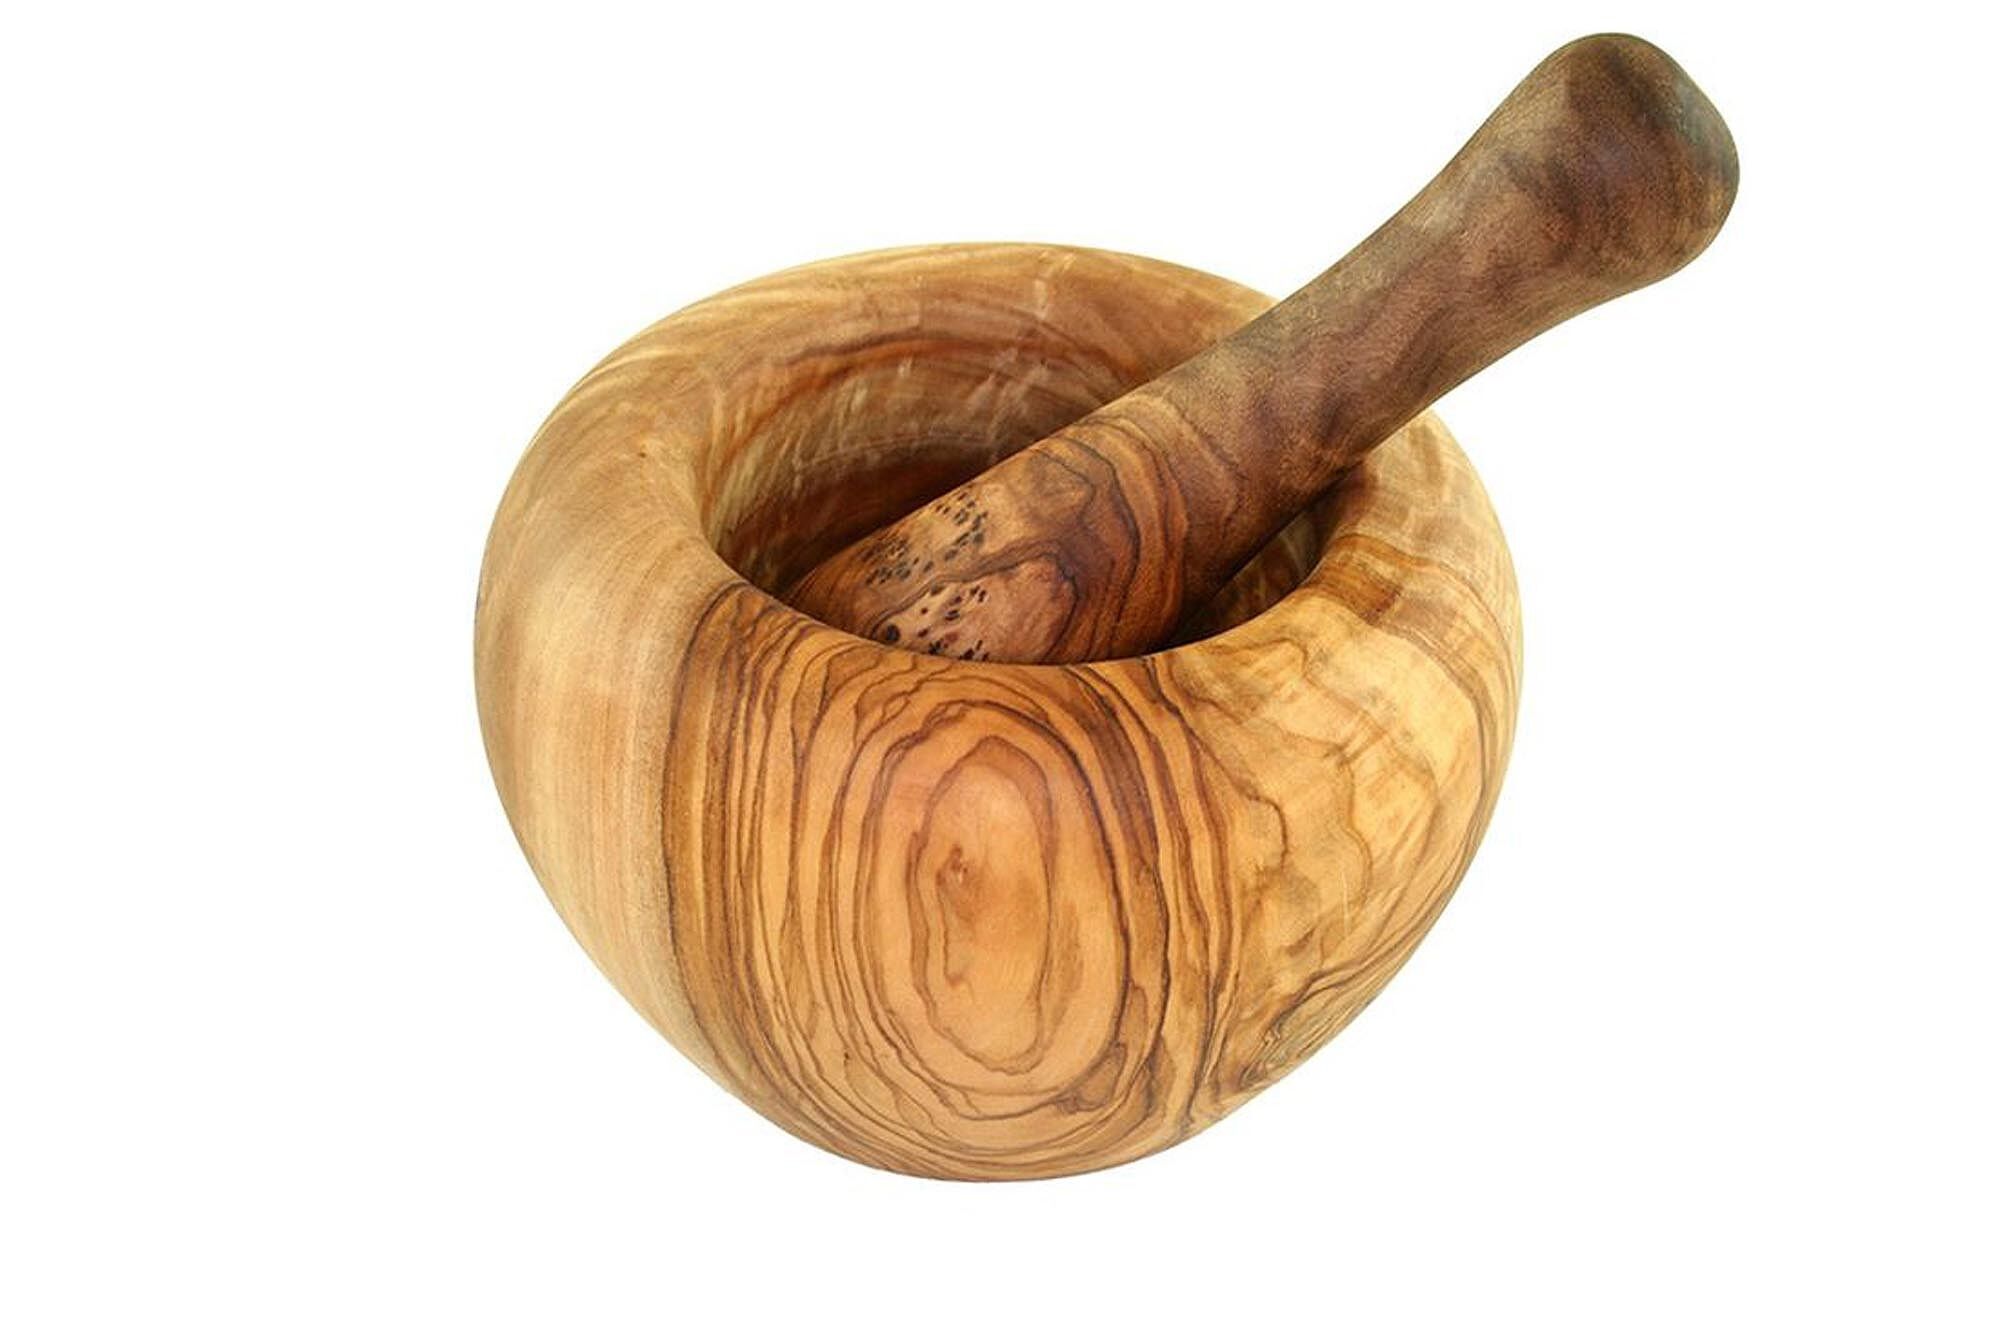 wood ground 12 Mortar cm made Ø pestle round Buy of olive including wholesale